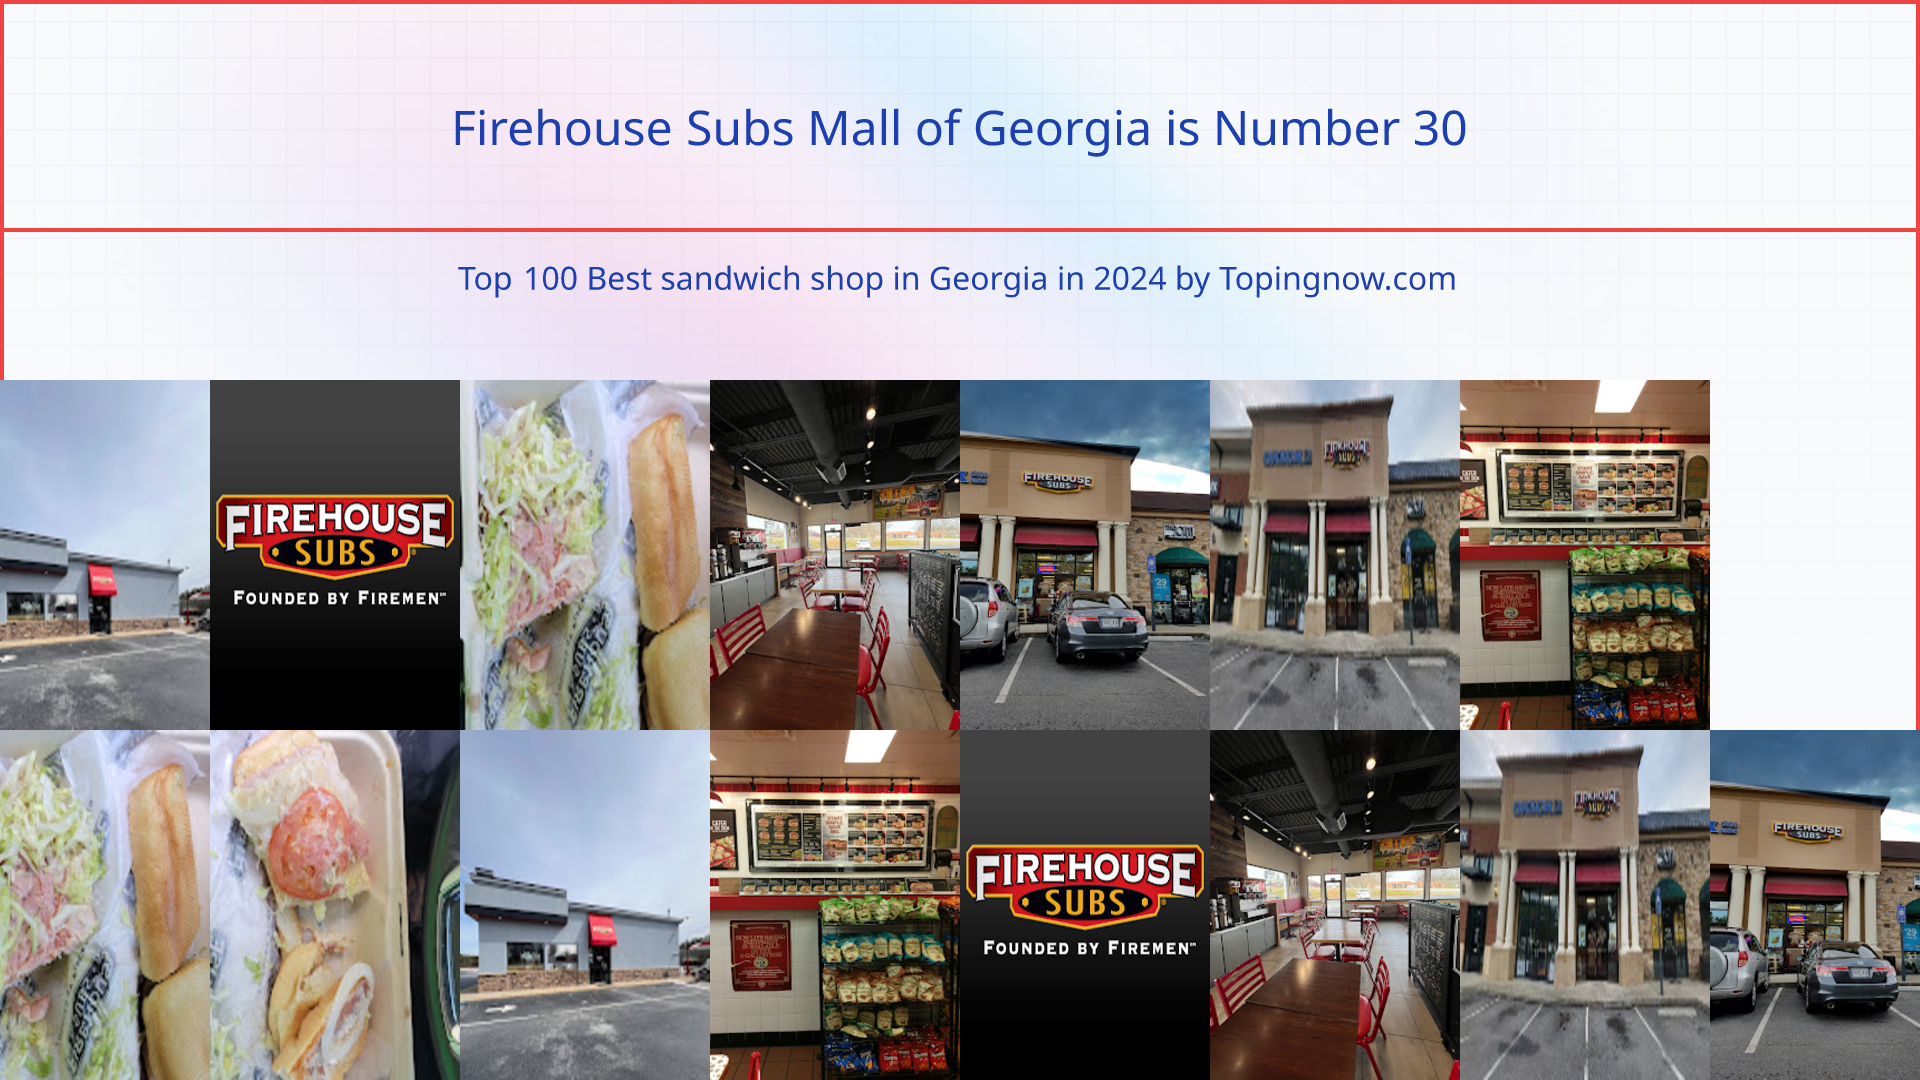 Firehouse Subs Mall of Georgia: Top 100 Best sandwich shop in Georgia in 2024